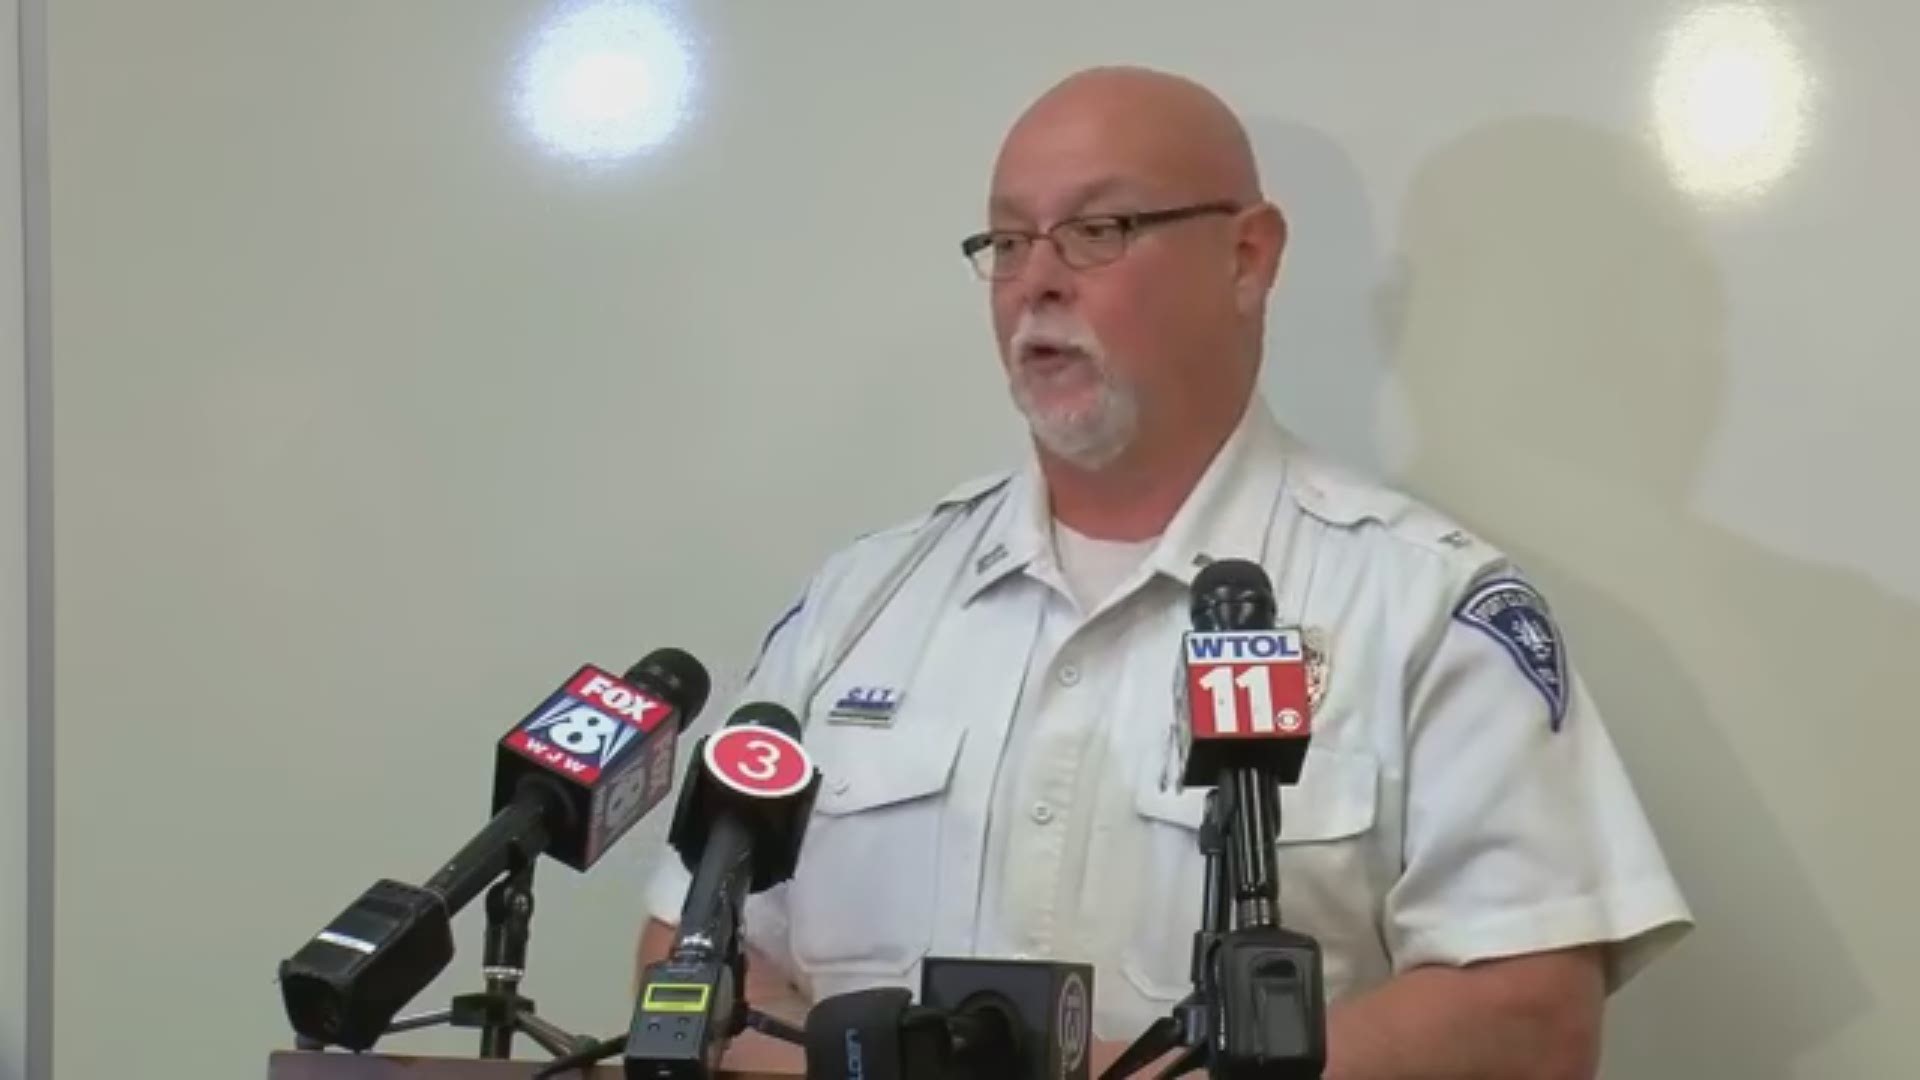 Thursday at 1:15 p.m., Port Clinton Police Chief Rob Hickman addressed the press regarding missing 14-year-old Harley Dilly, who has been missing since Dec. 20.